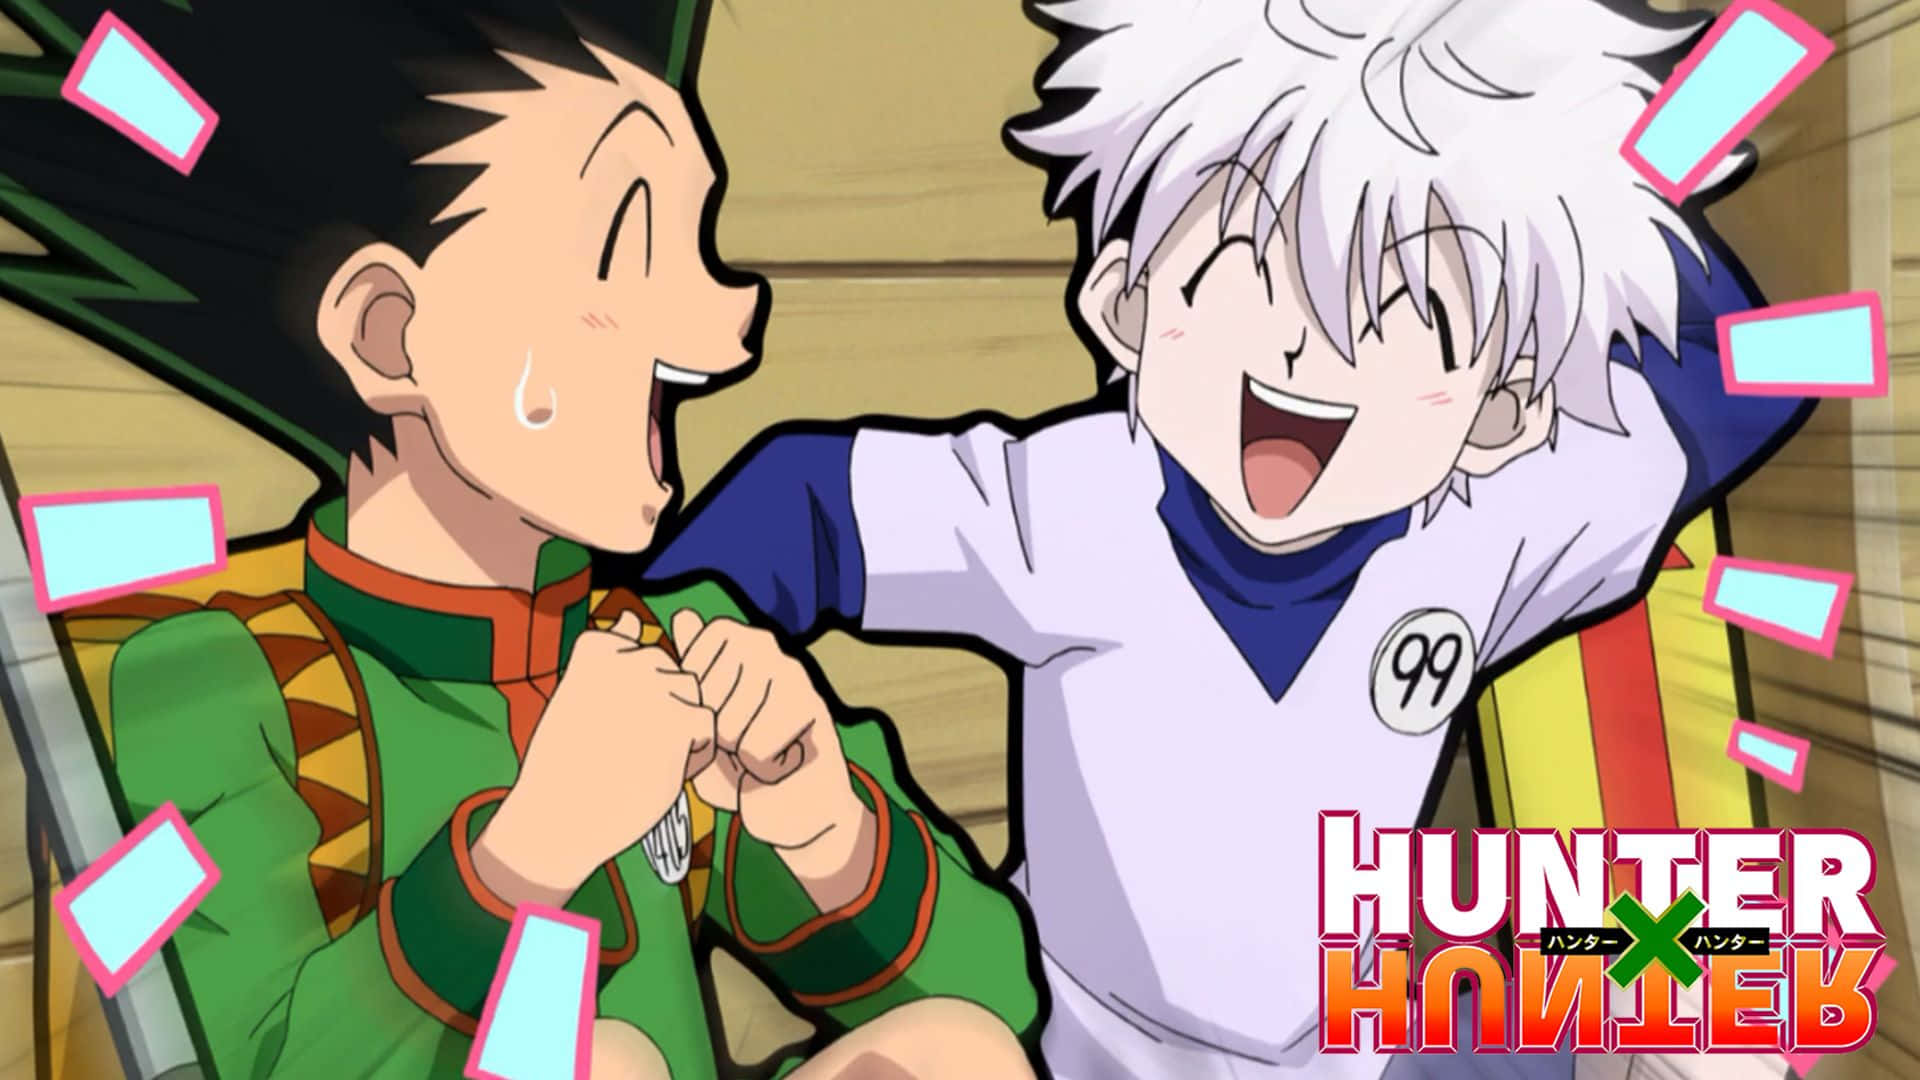 Gon Freecss and Killua Zoldyck are a team of inspirational young heroes Wallpaper